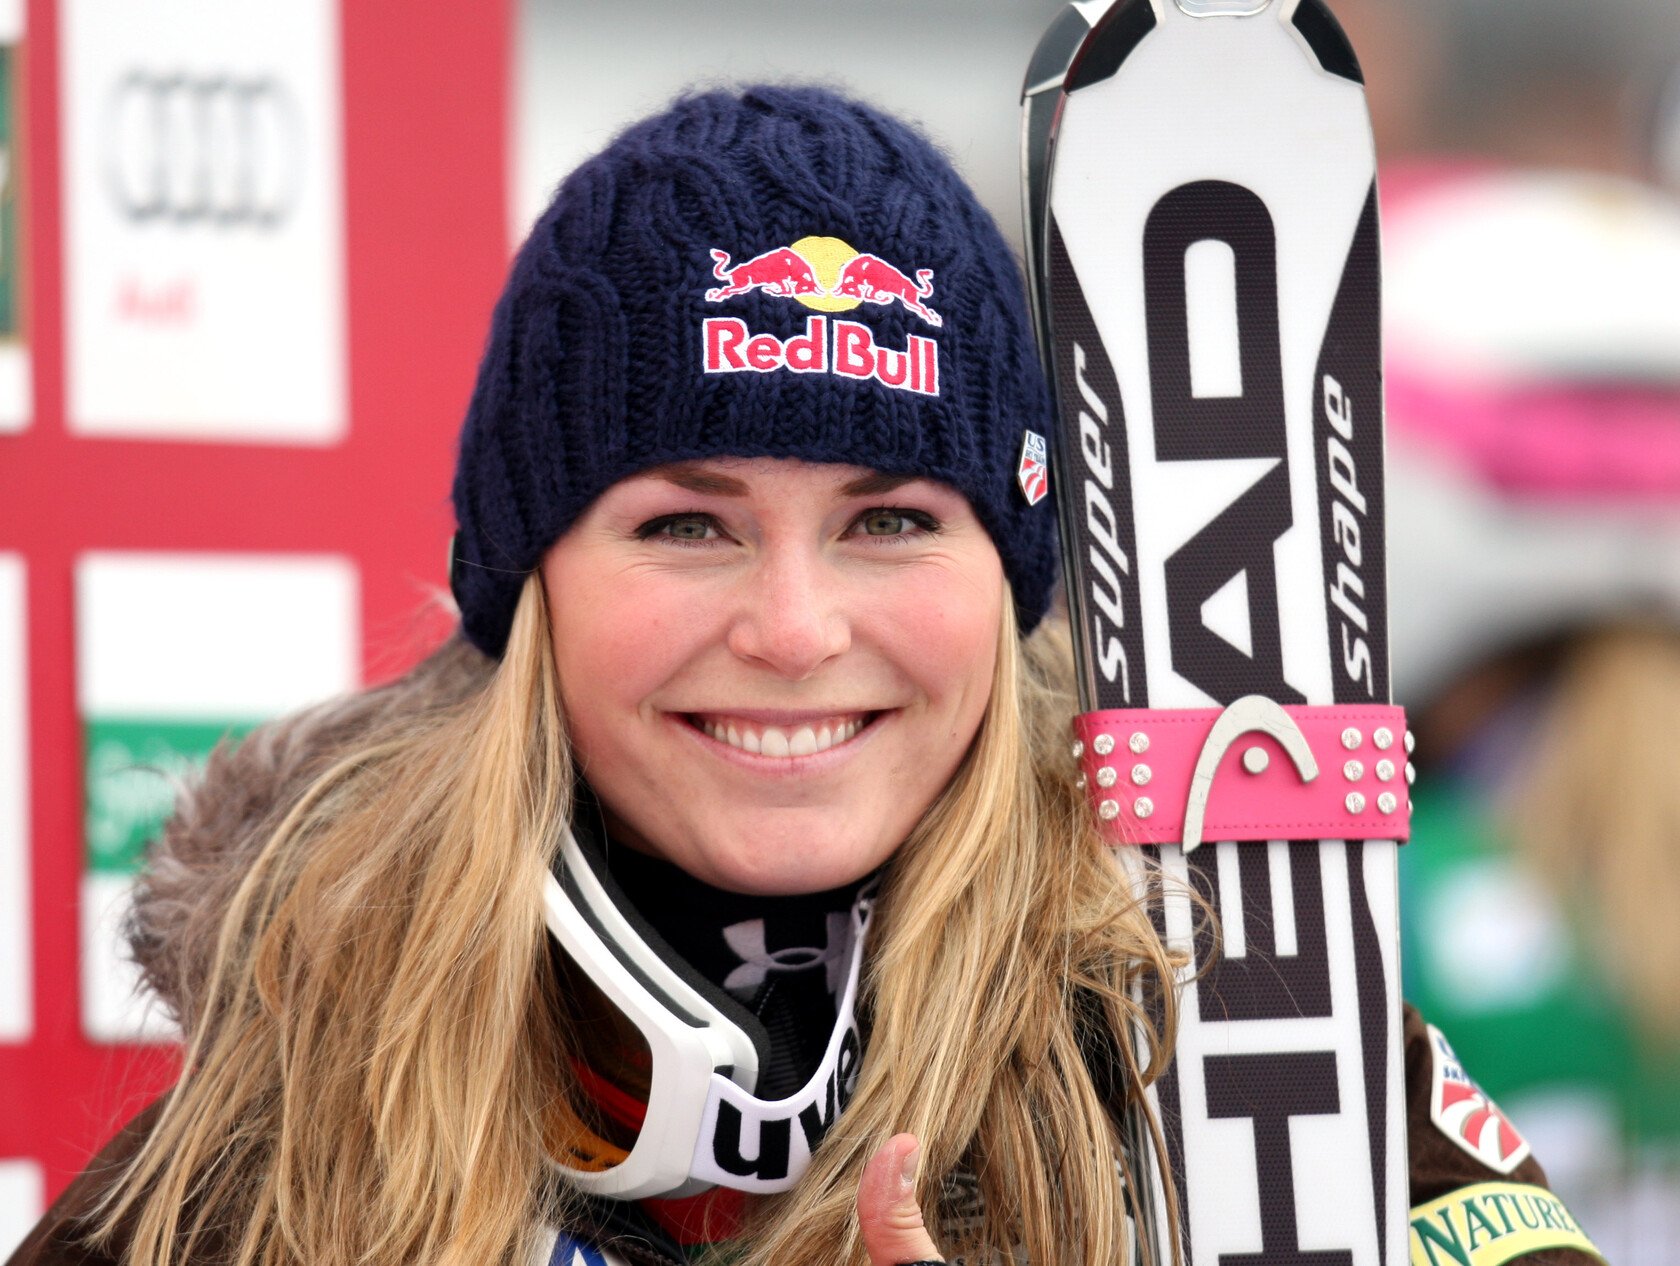 Audi Fis World Cup 2010 | Hauser Kaibling